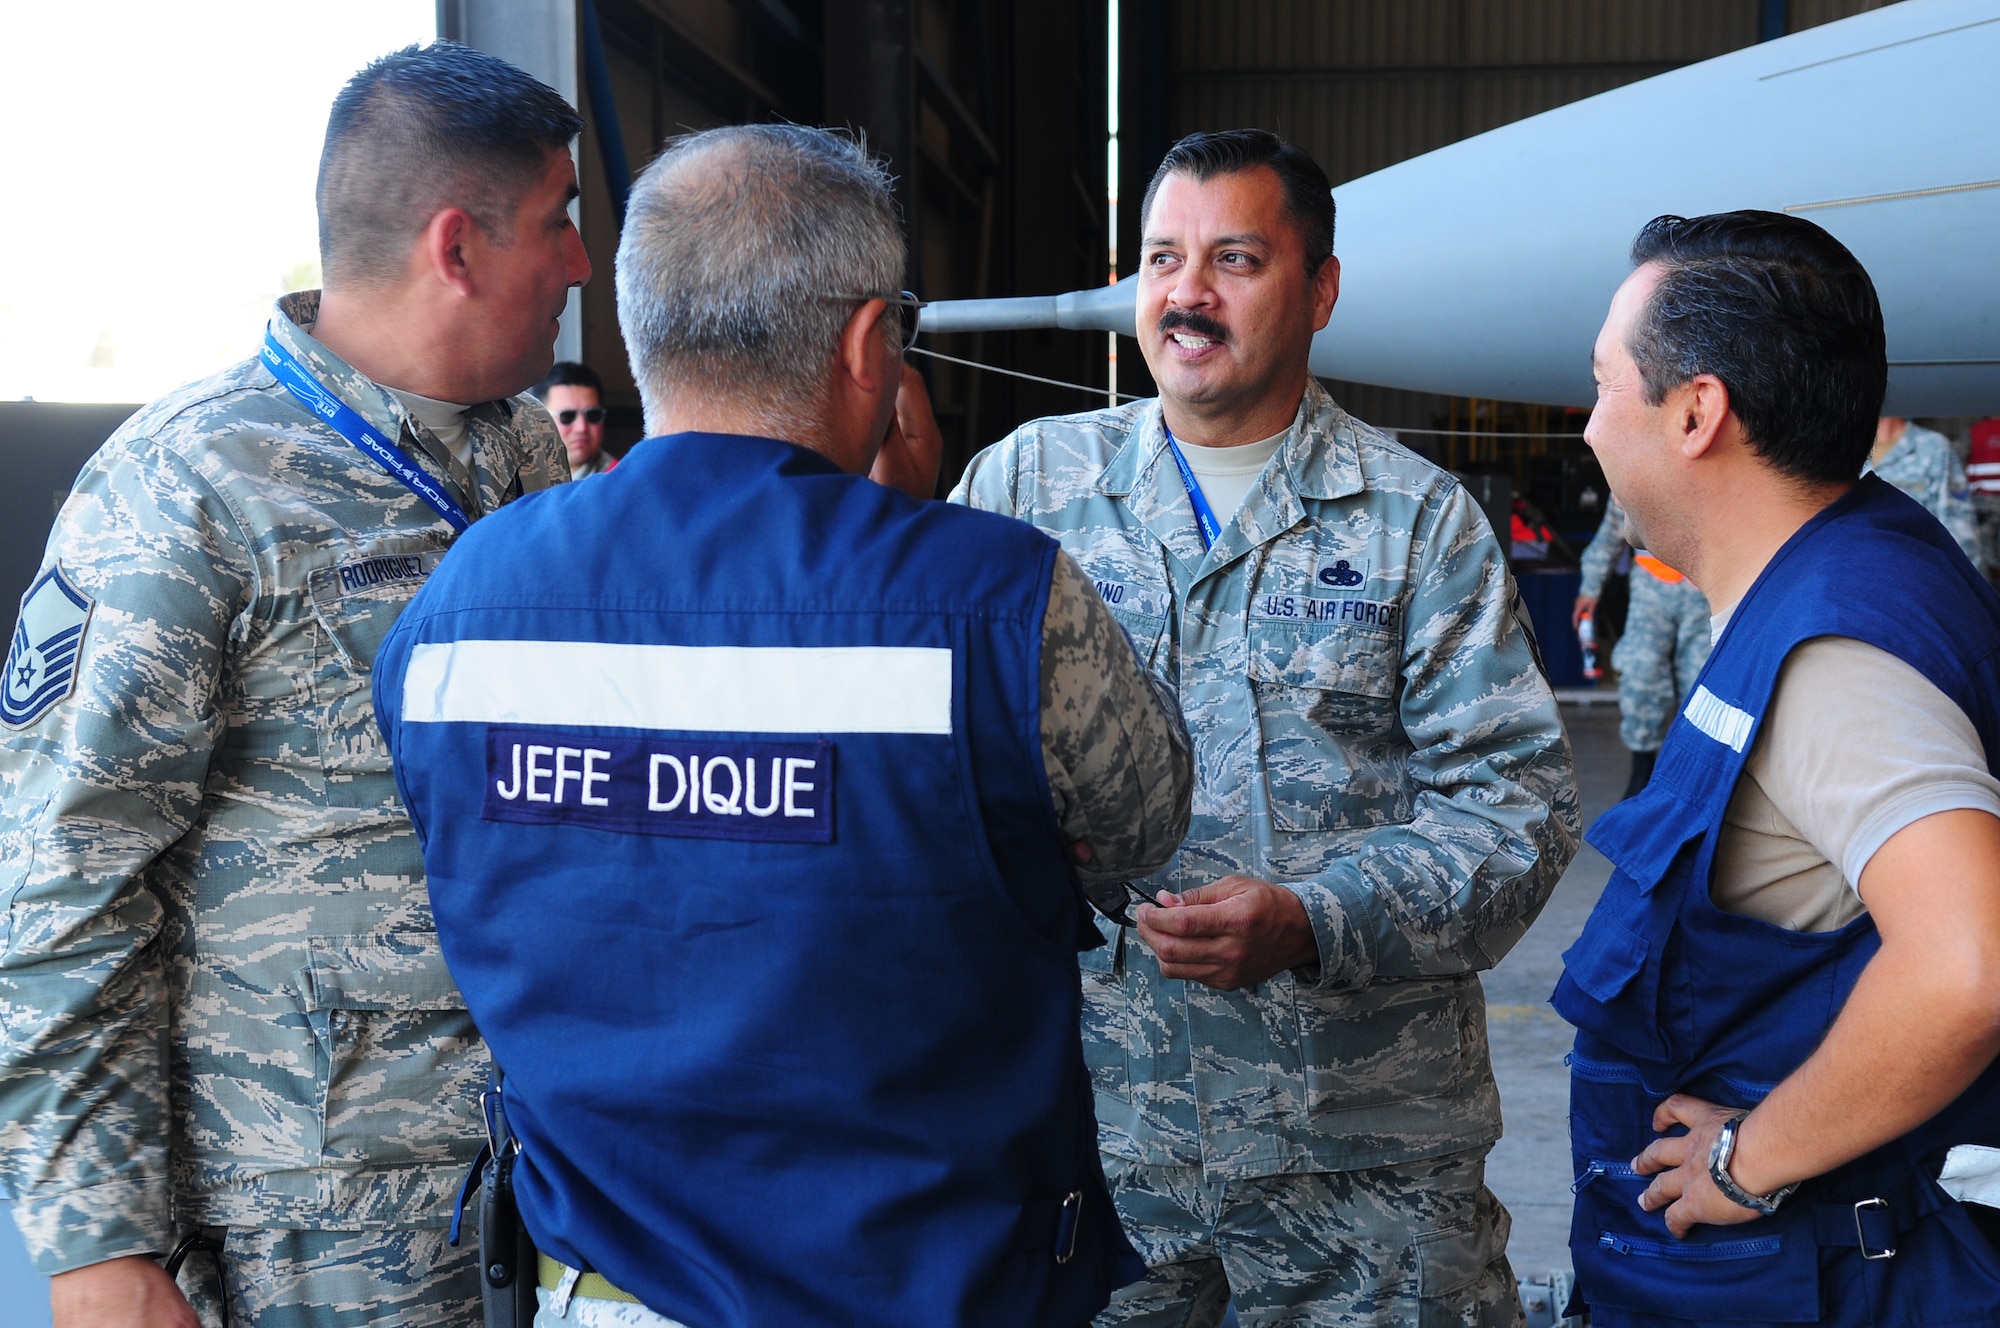 Master Sgt. Pete Soriano (second from right), an F-16 avionics specialist assigned to the 149th Fighter Wing, Texas Air National Guard, exchanges maintenance practices with his counterparts from FACH (Fuerza Aerea de Chile) during FIDAE (Feria Internacional del Aire y del Espacio), an international trade exhibition air and space show, in Santiago, Chile, March 25, 2014. Also pictured is Master Sgt. Carlos Rodriguez (left), an F-16 crew chief assigned to the 149th Fighter Wing. Members of the Texas Air National Guard were in Chile as part of the National Guard Bureau's State Partnership Program. (U.S. Air National Guard photo by Senior Master Sgt. Miguel D. Arellano / Released)